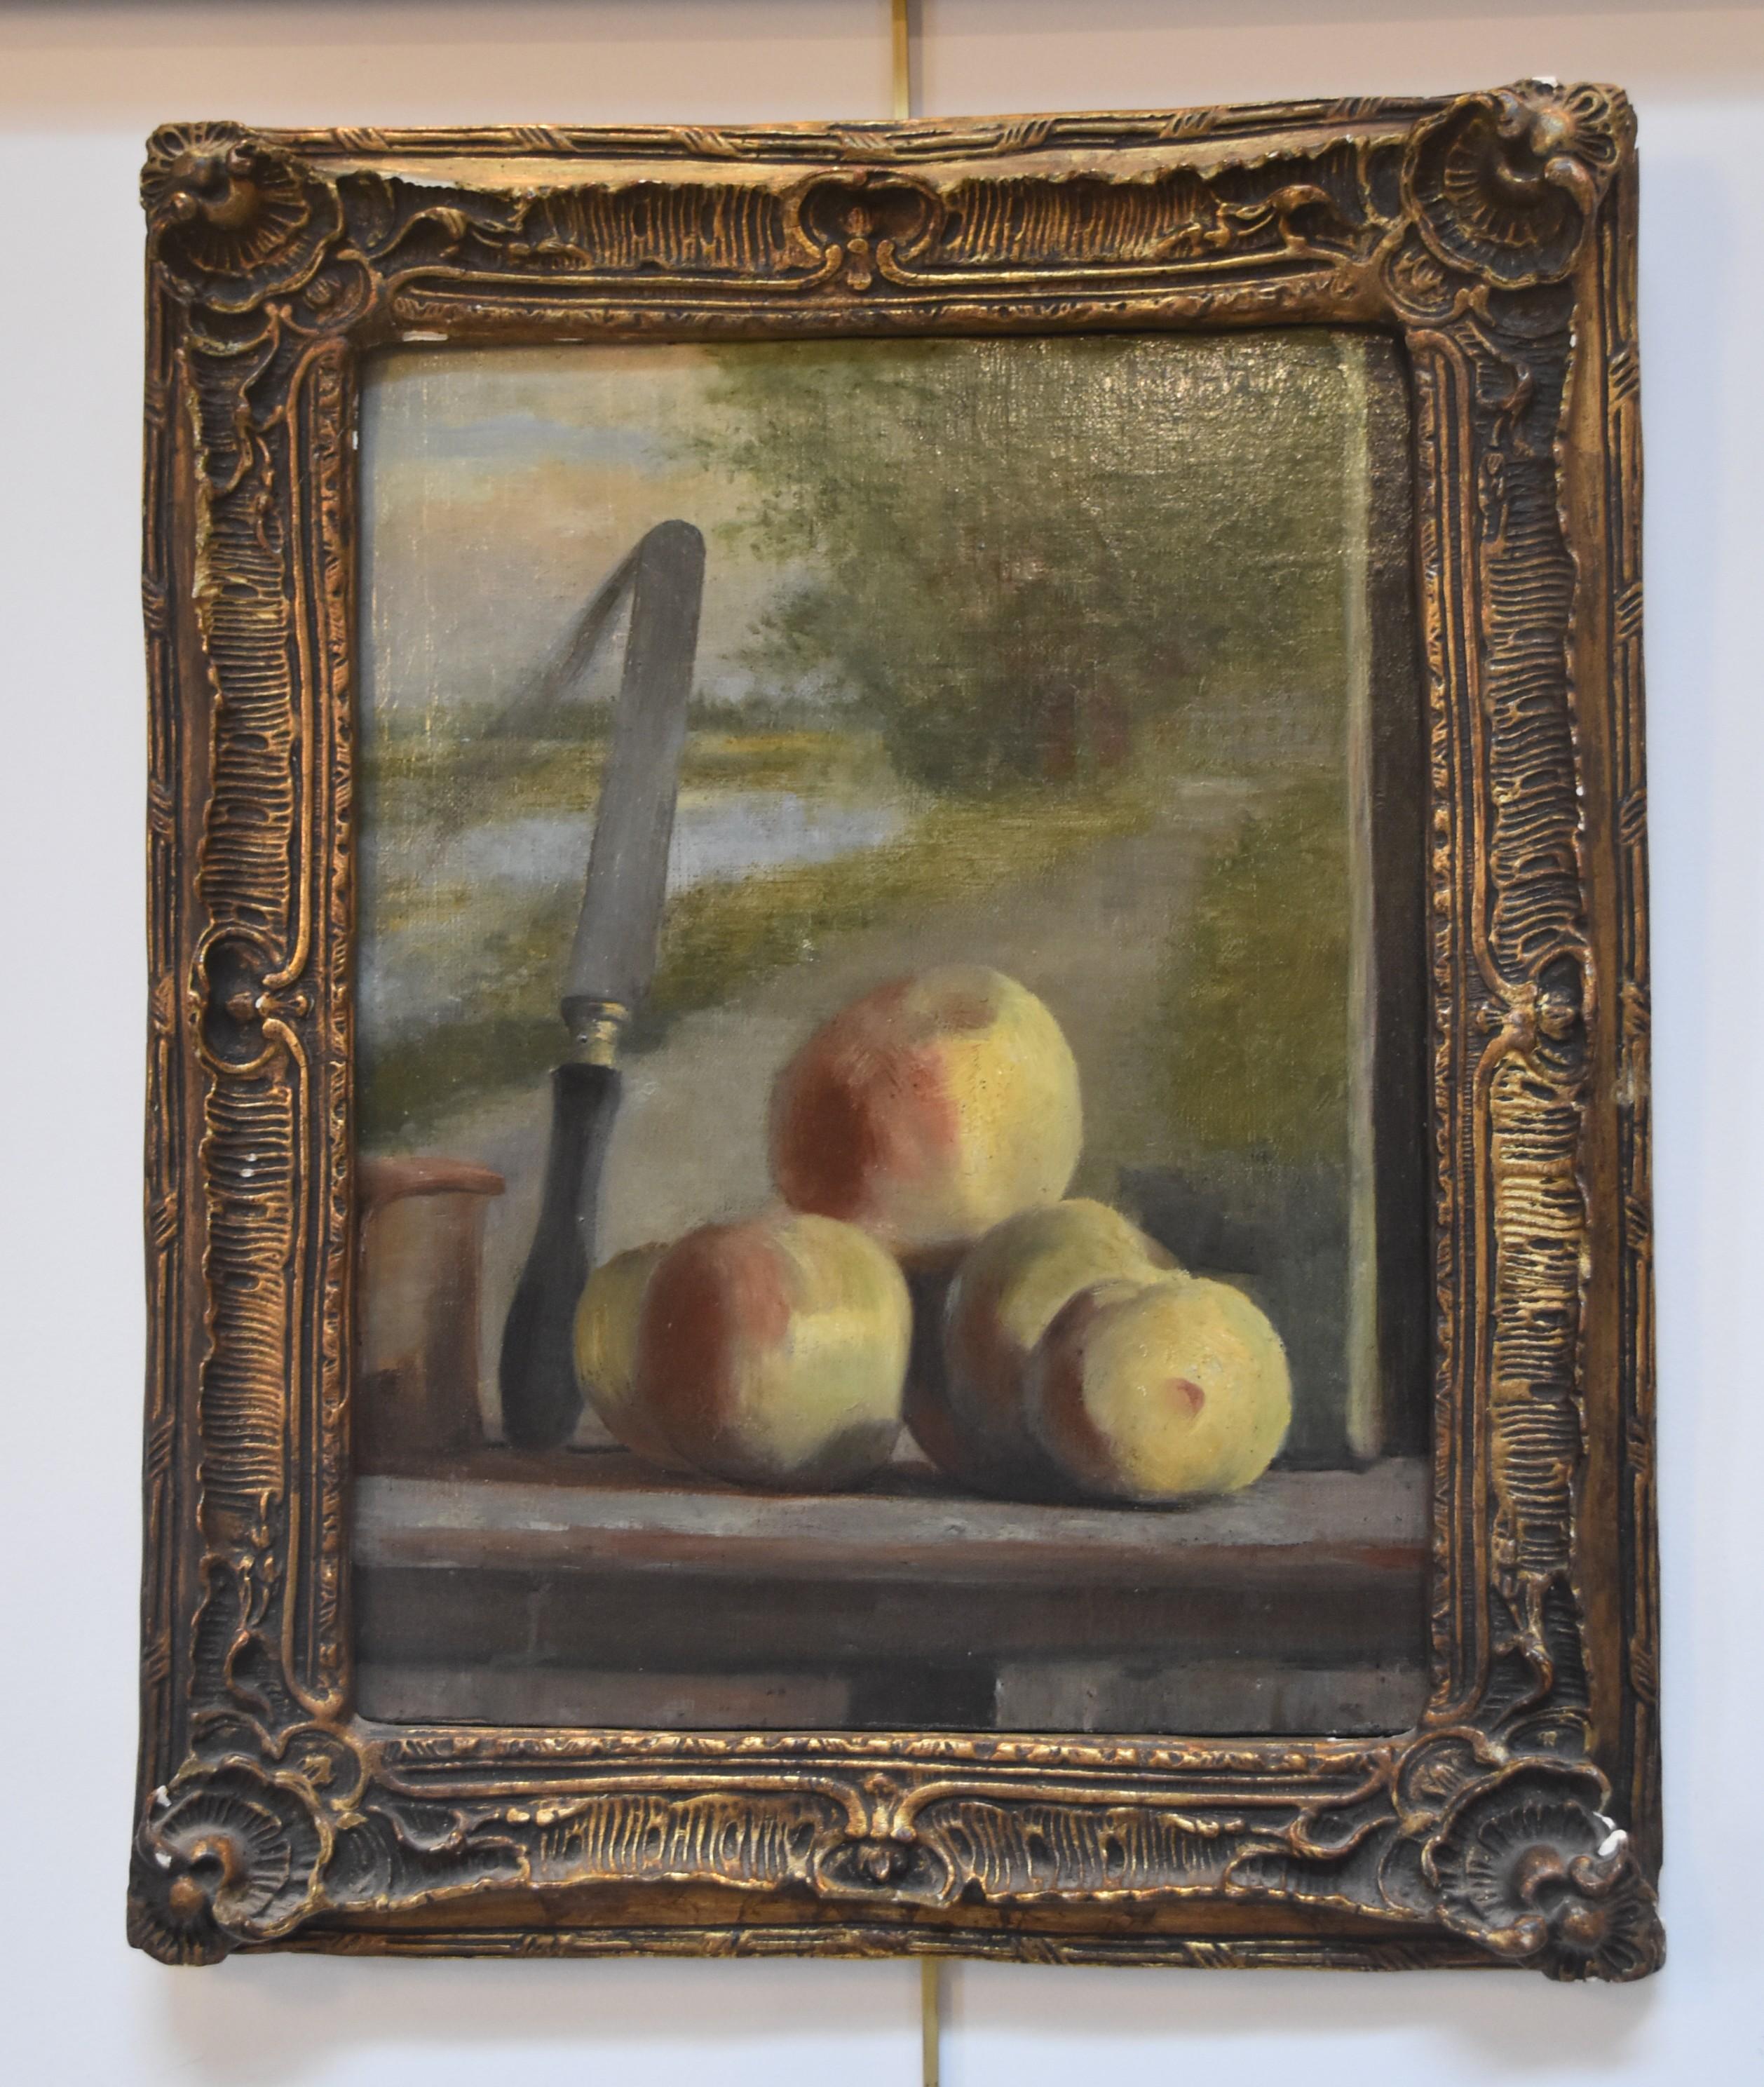 French Romantic School, 19th century
Still life with peaches and a painting,
oil on canvas, mounted on a wood panel
34 x 25.5 cm
In good condition
In a vintage frame : 44 x 36.5 cm (some losses in the gilding and small damages, see detail pictures